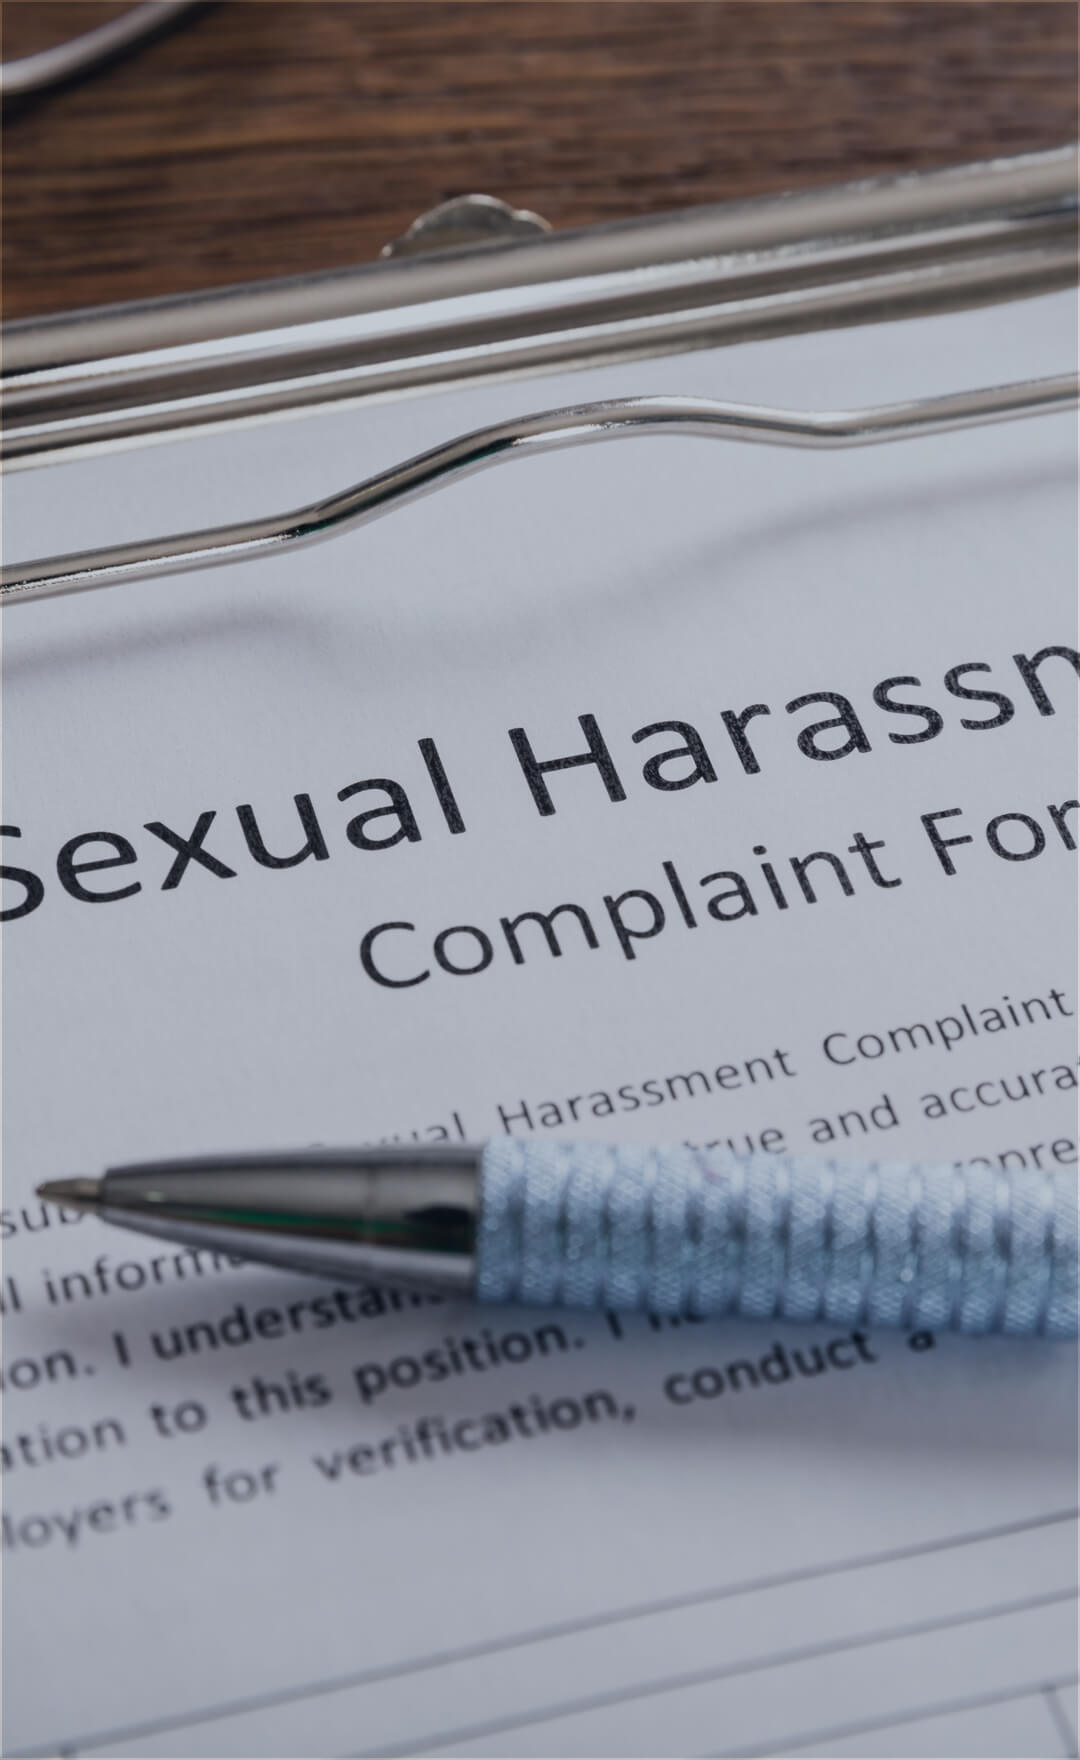 sexual harassment complaint form sample